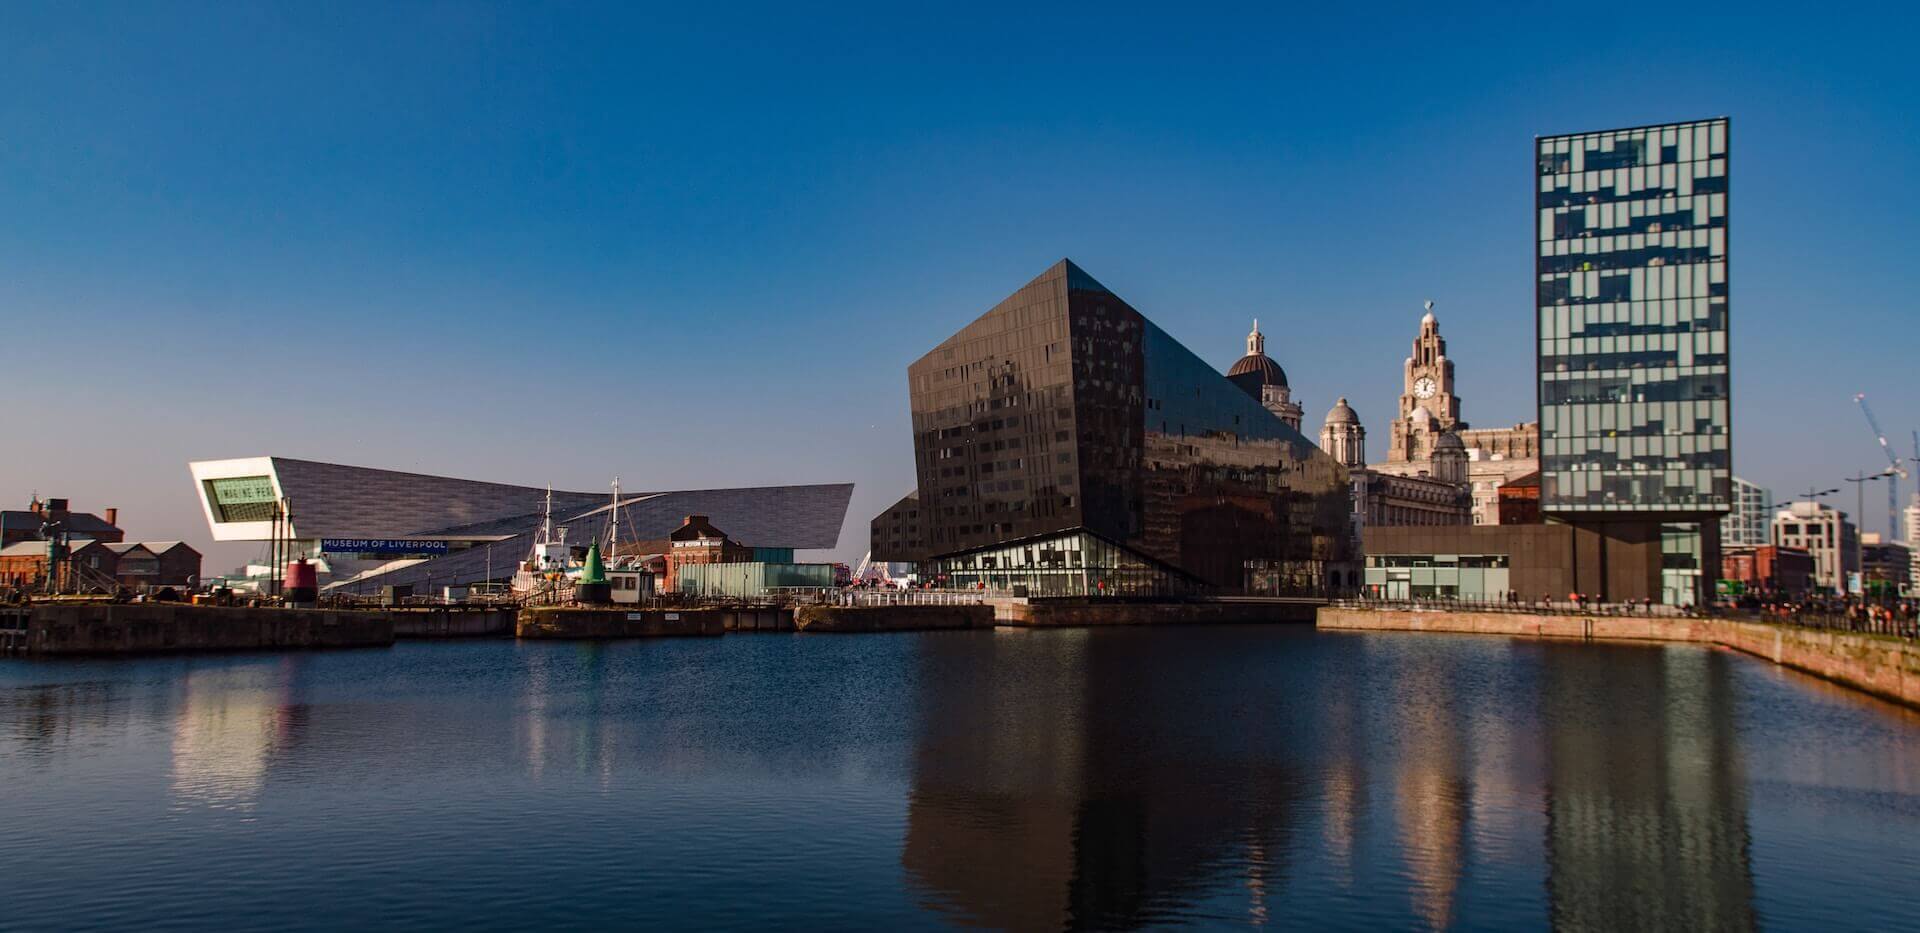 Eurovision 2023: Best Things to Do in Liverpool During Eurovision